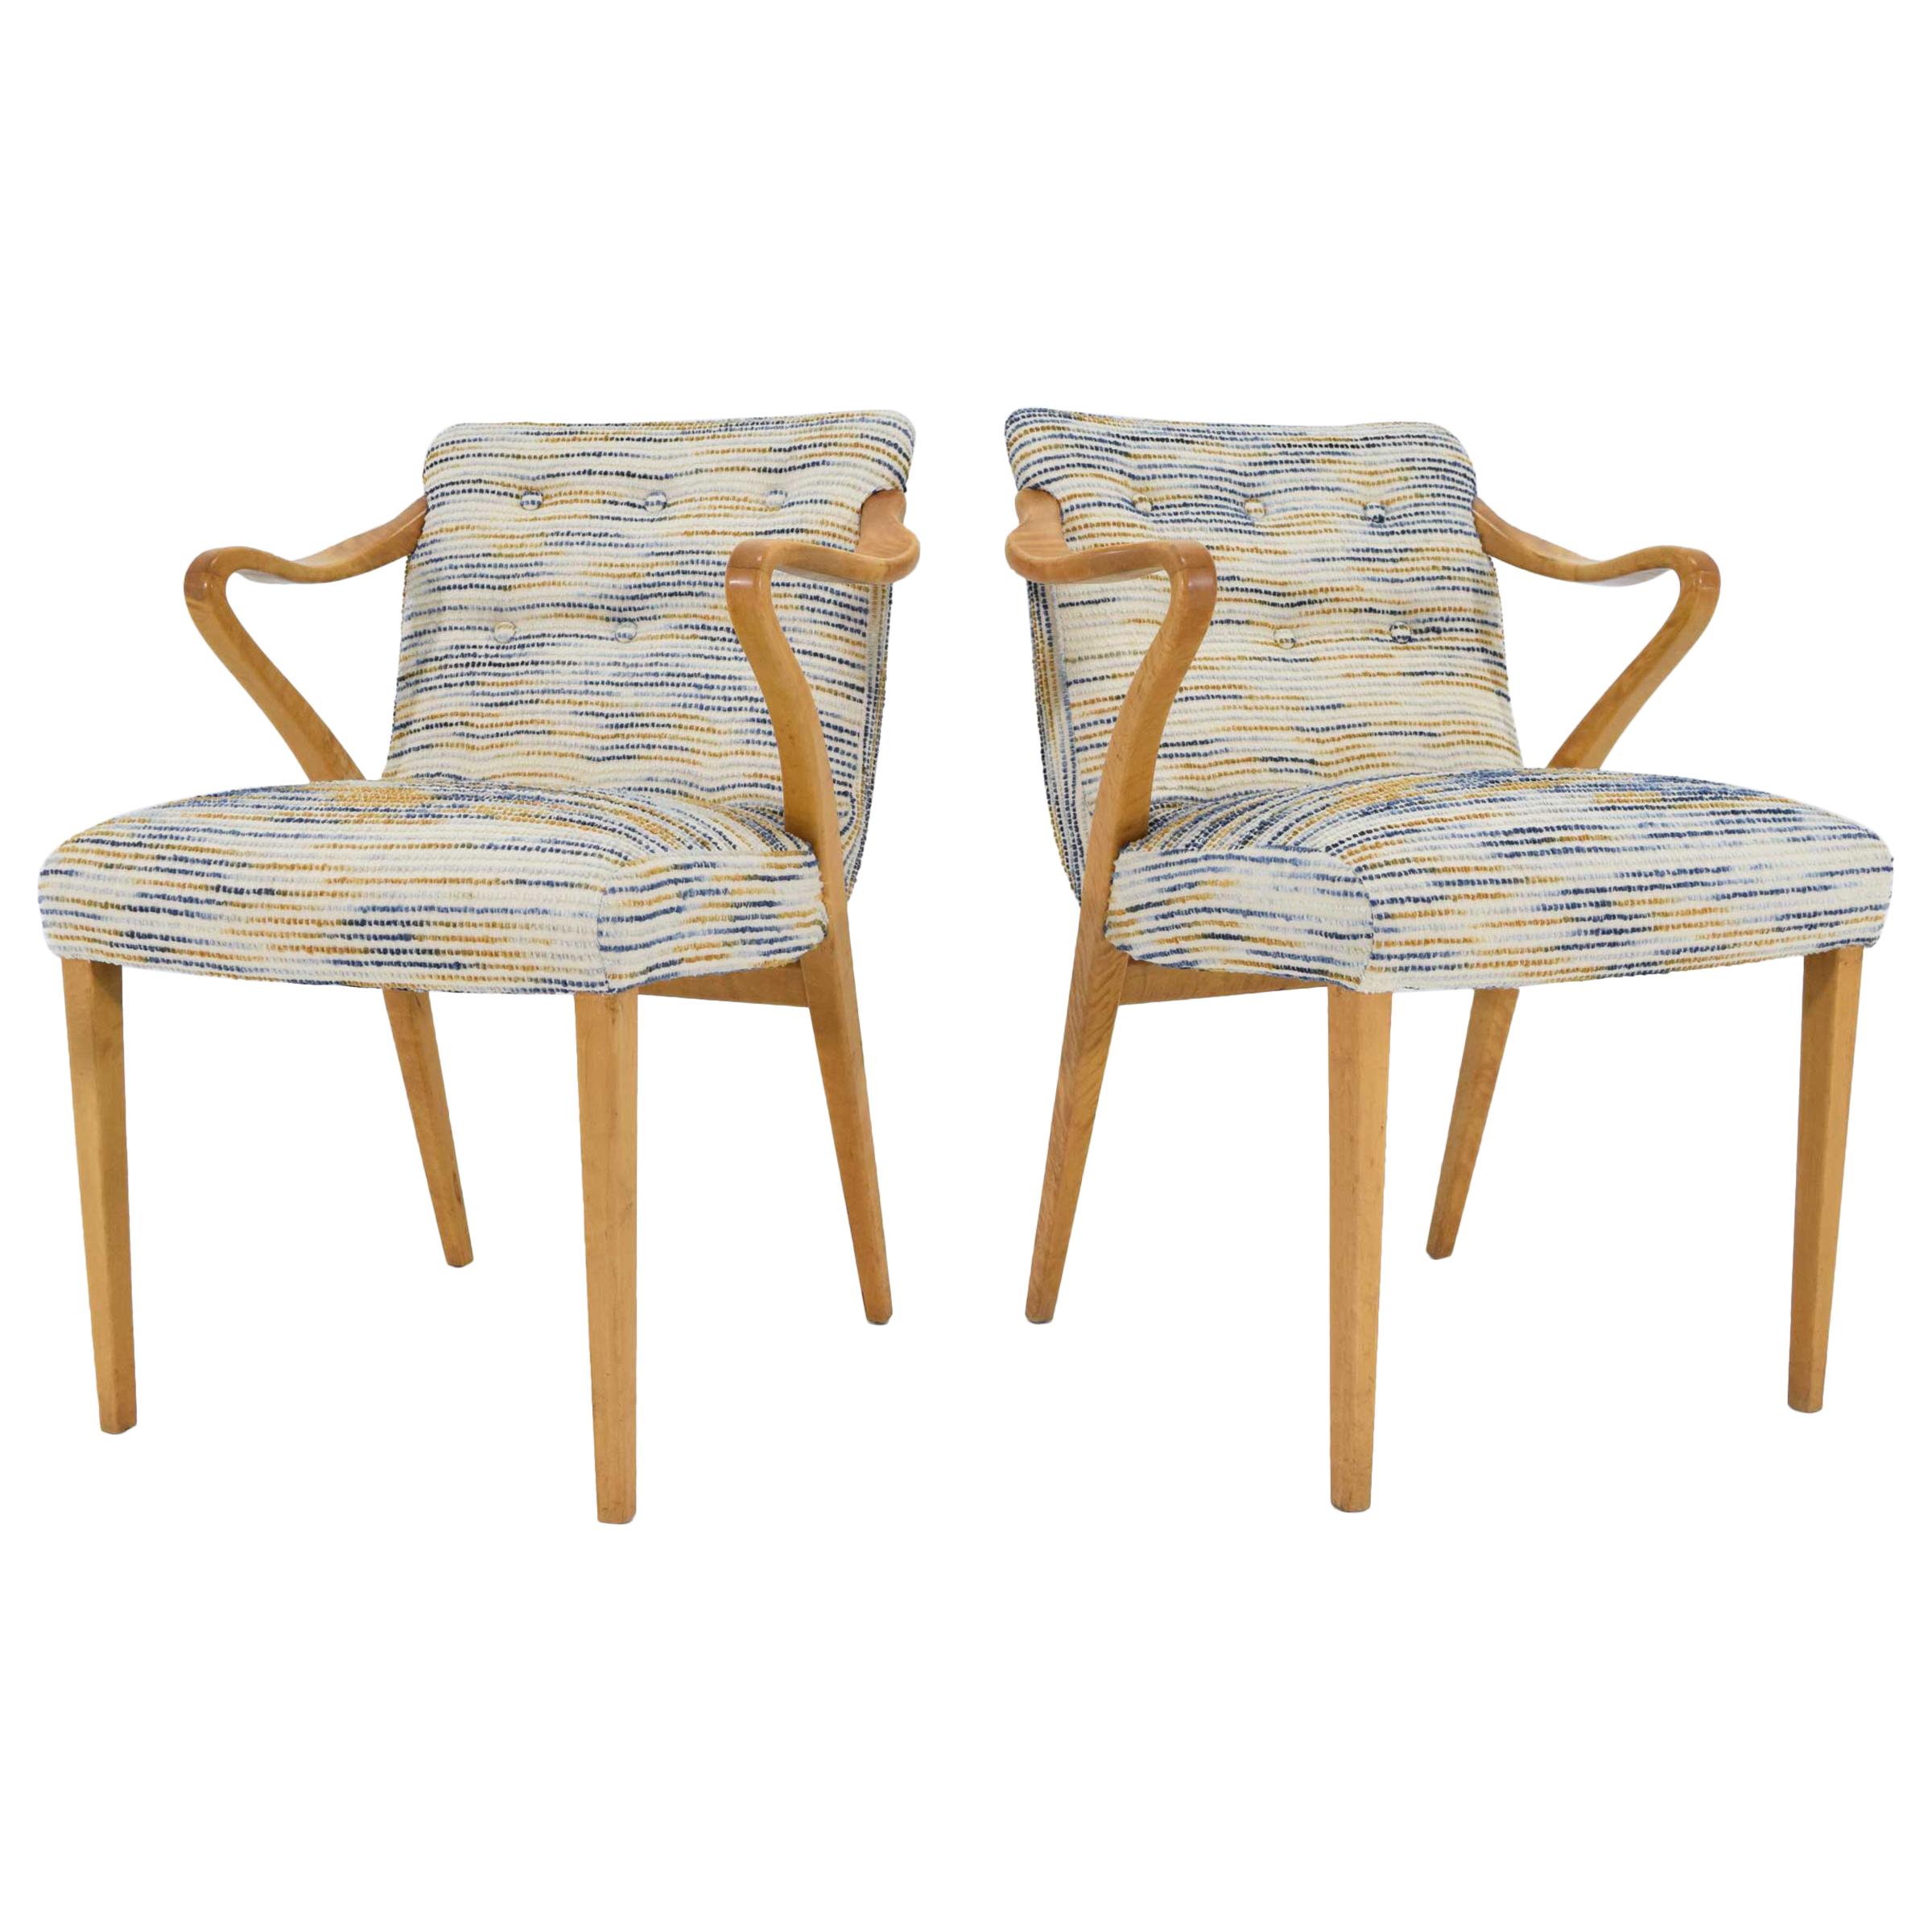 Axel Larsson for Bodafors Armchairs, 1936 in Blue/Gold Upholstery